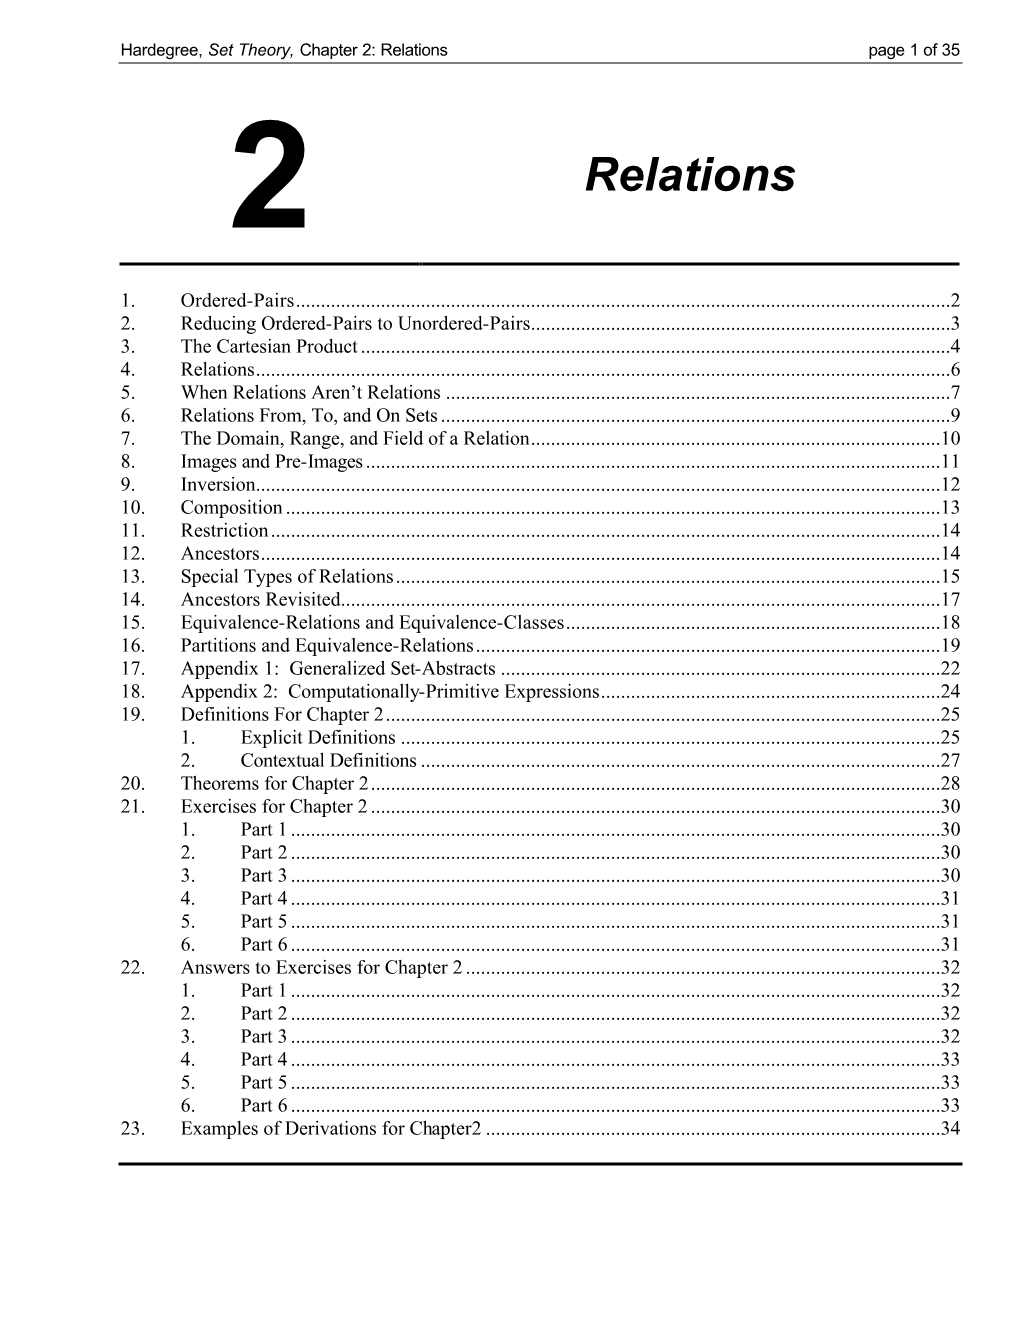 Relations Page 1 of 35 35 2 Relations